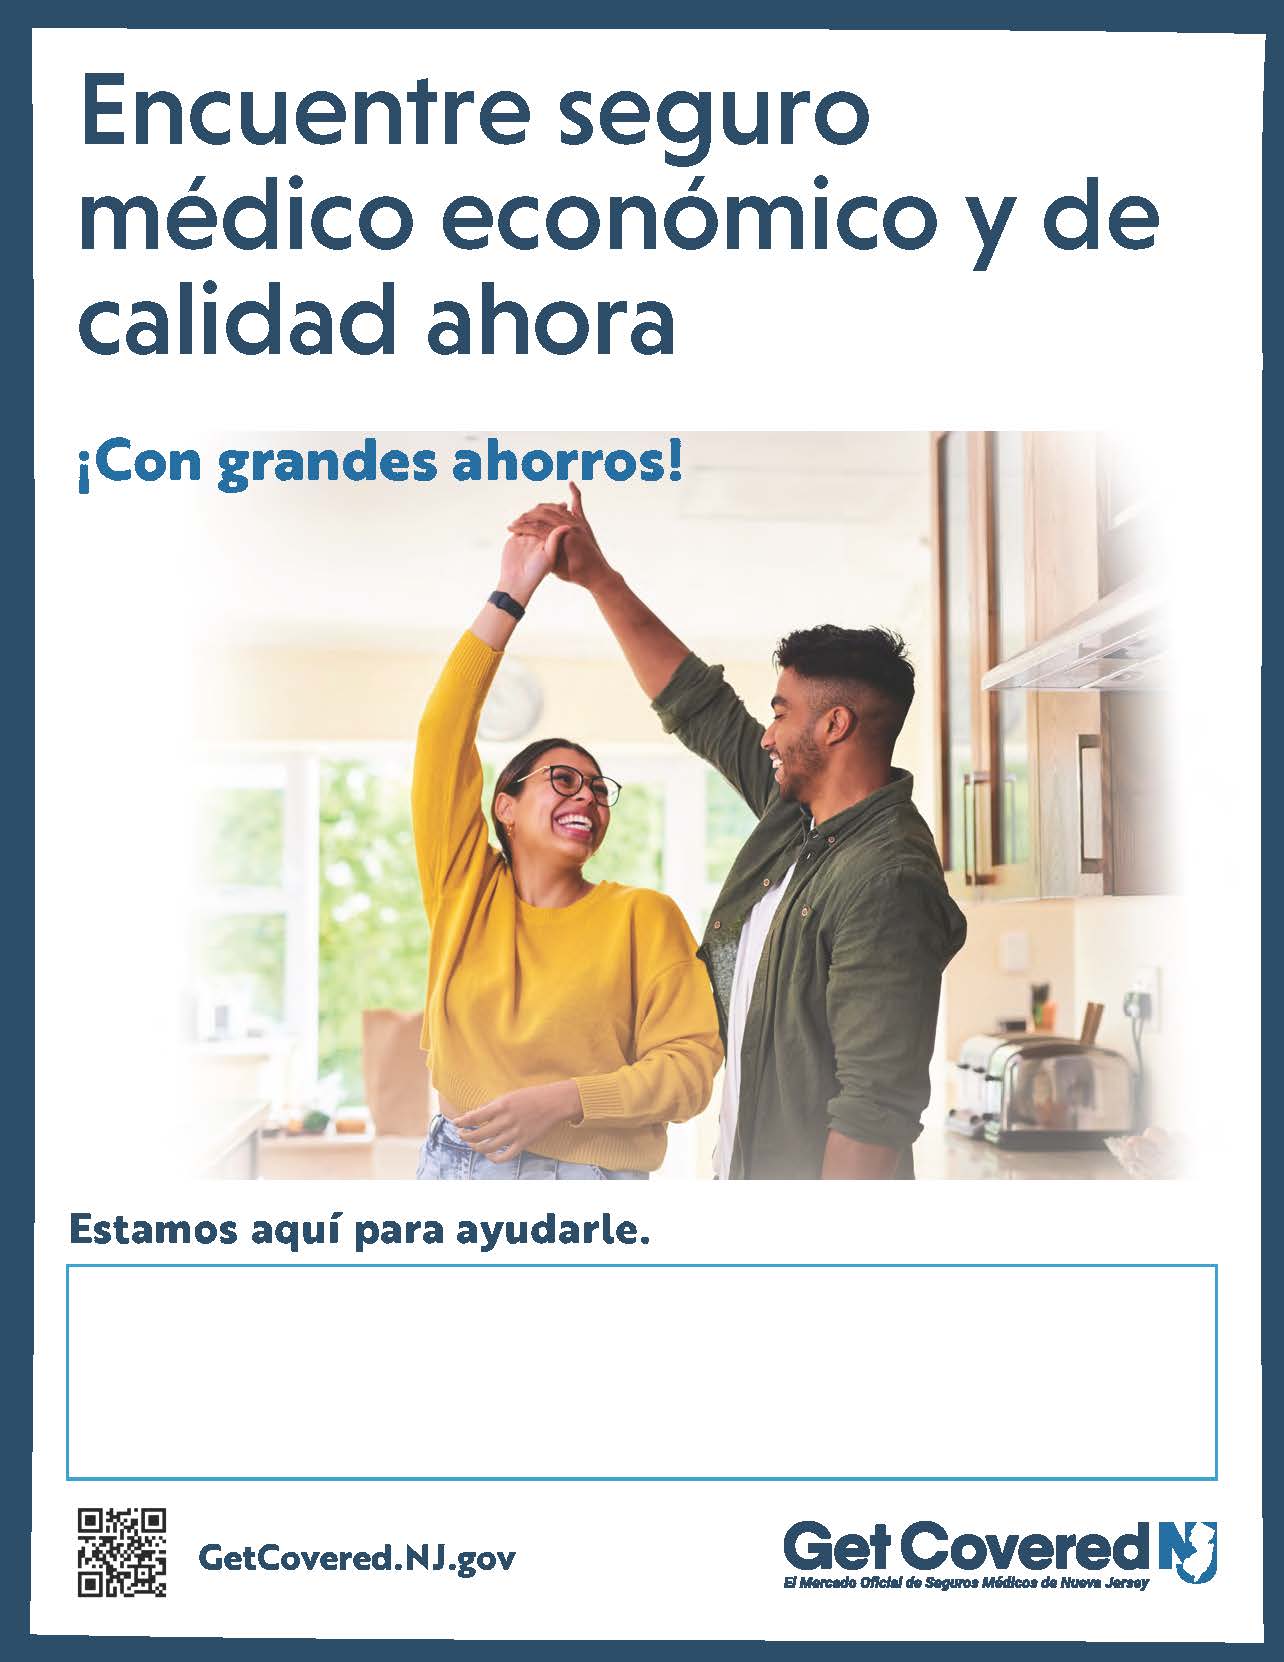 Image Contains screenshot of Spanish Version Flyer 1